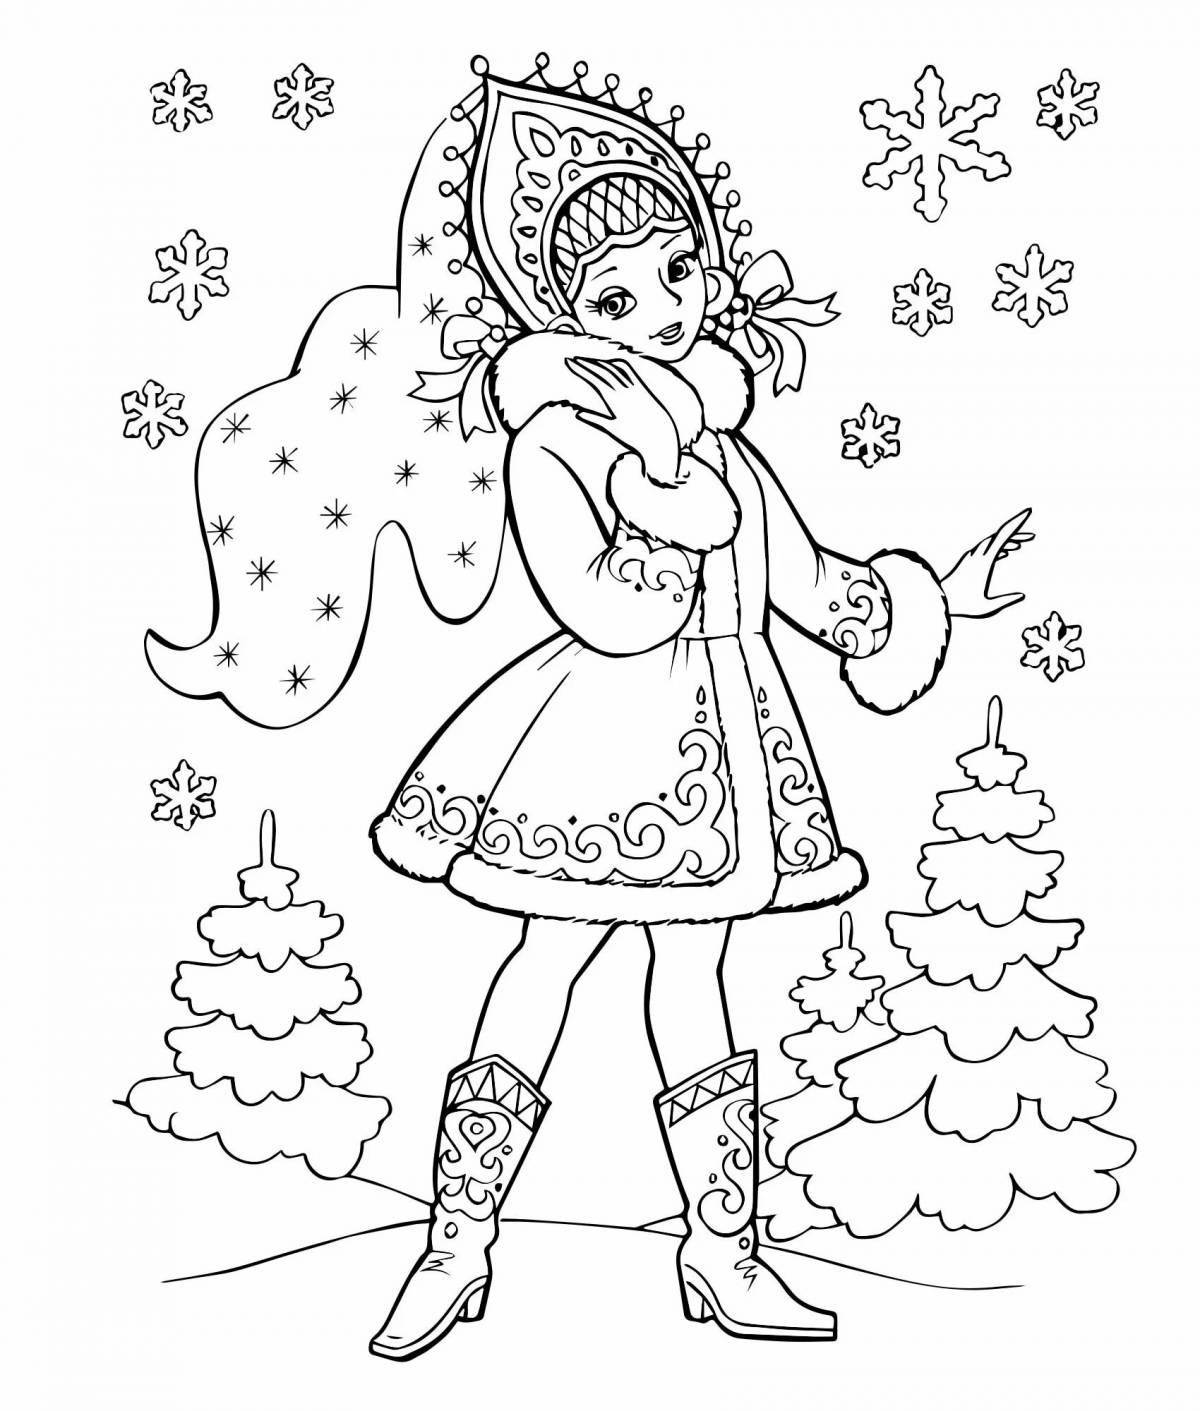 Charming snow maiden coloring book for kids